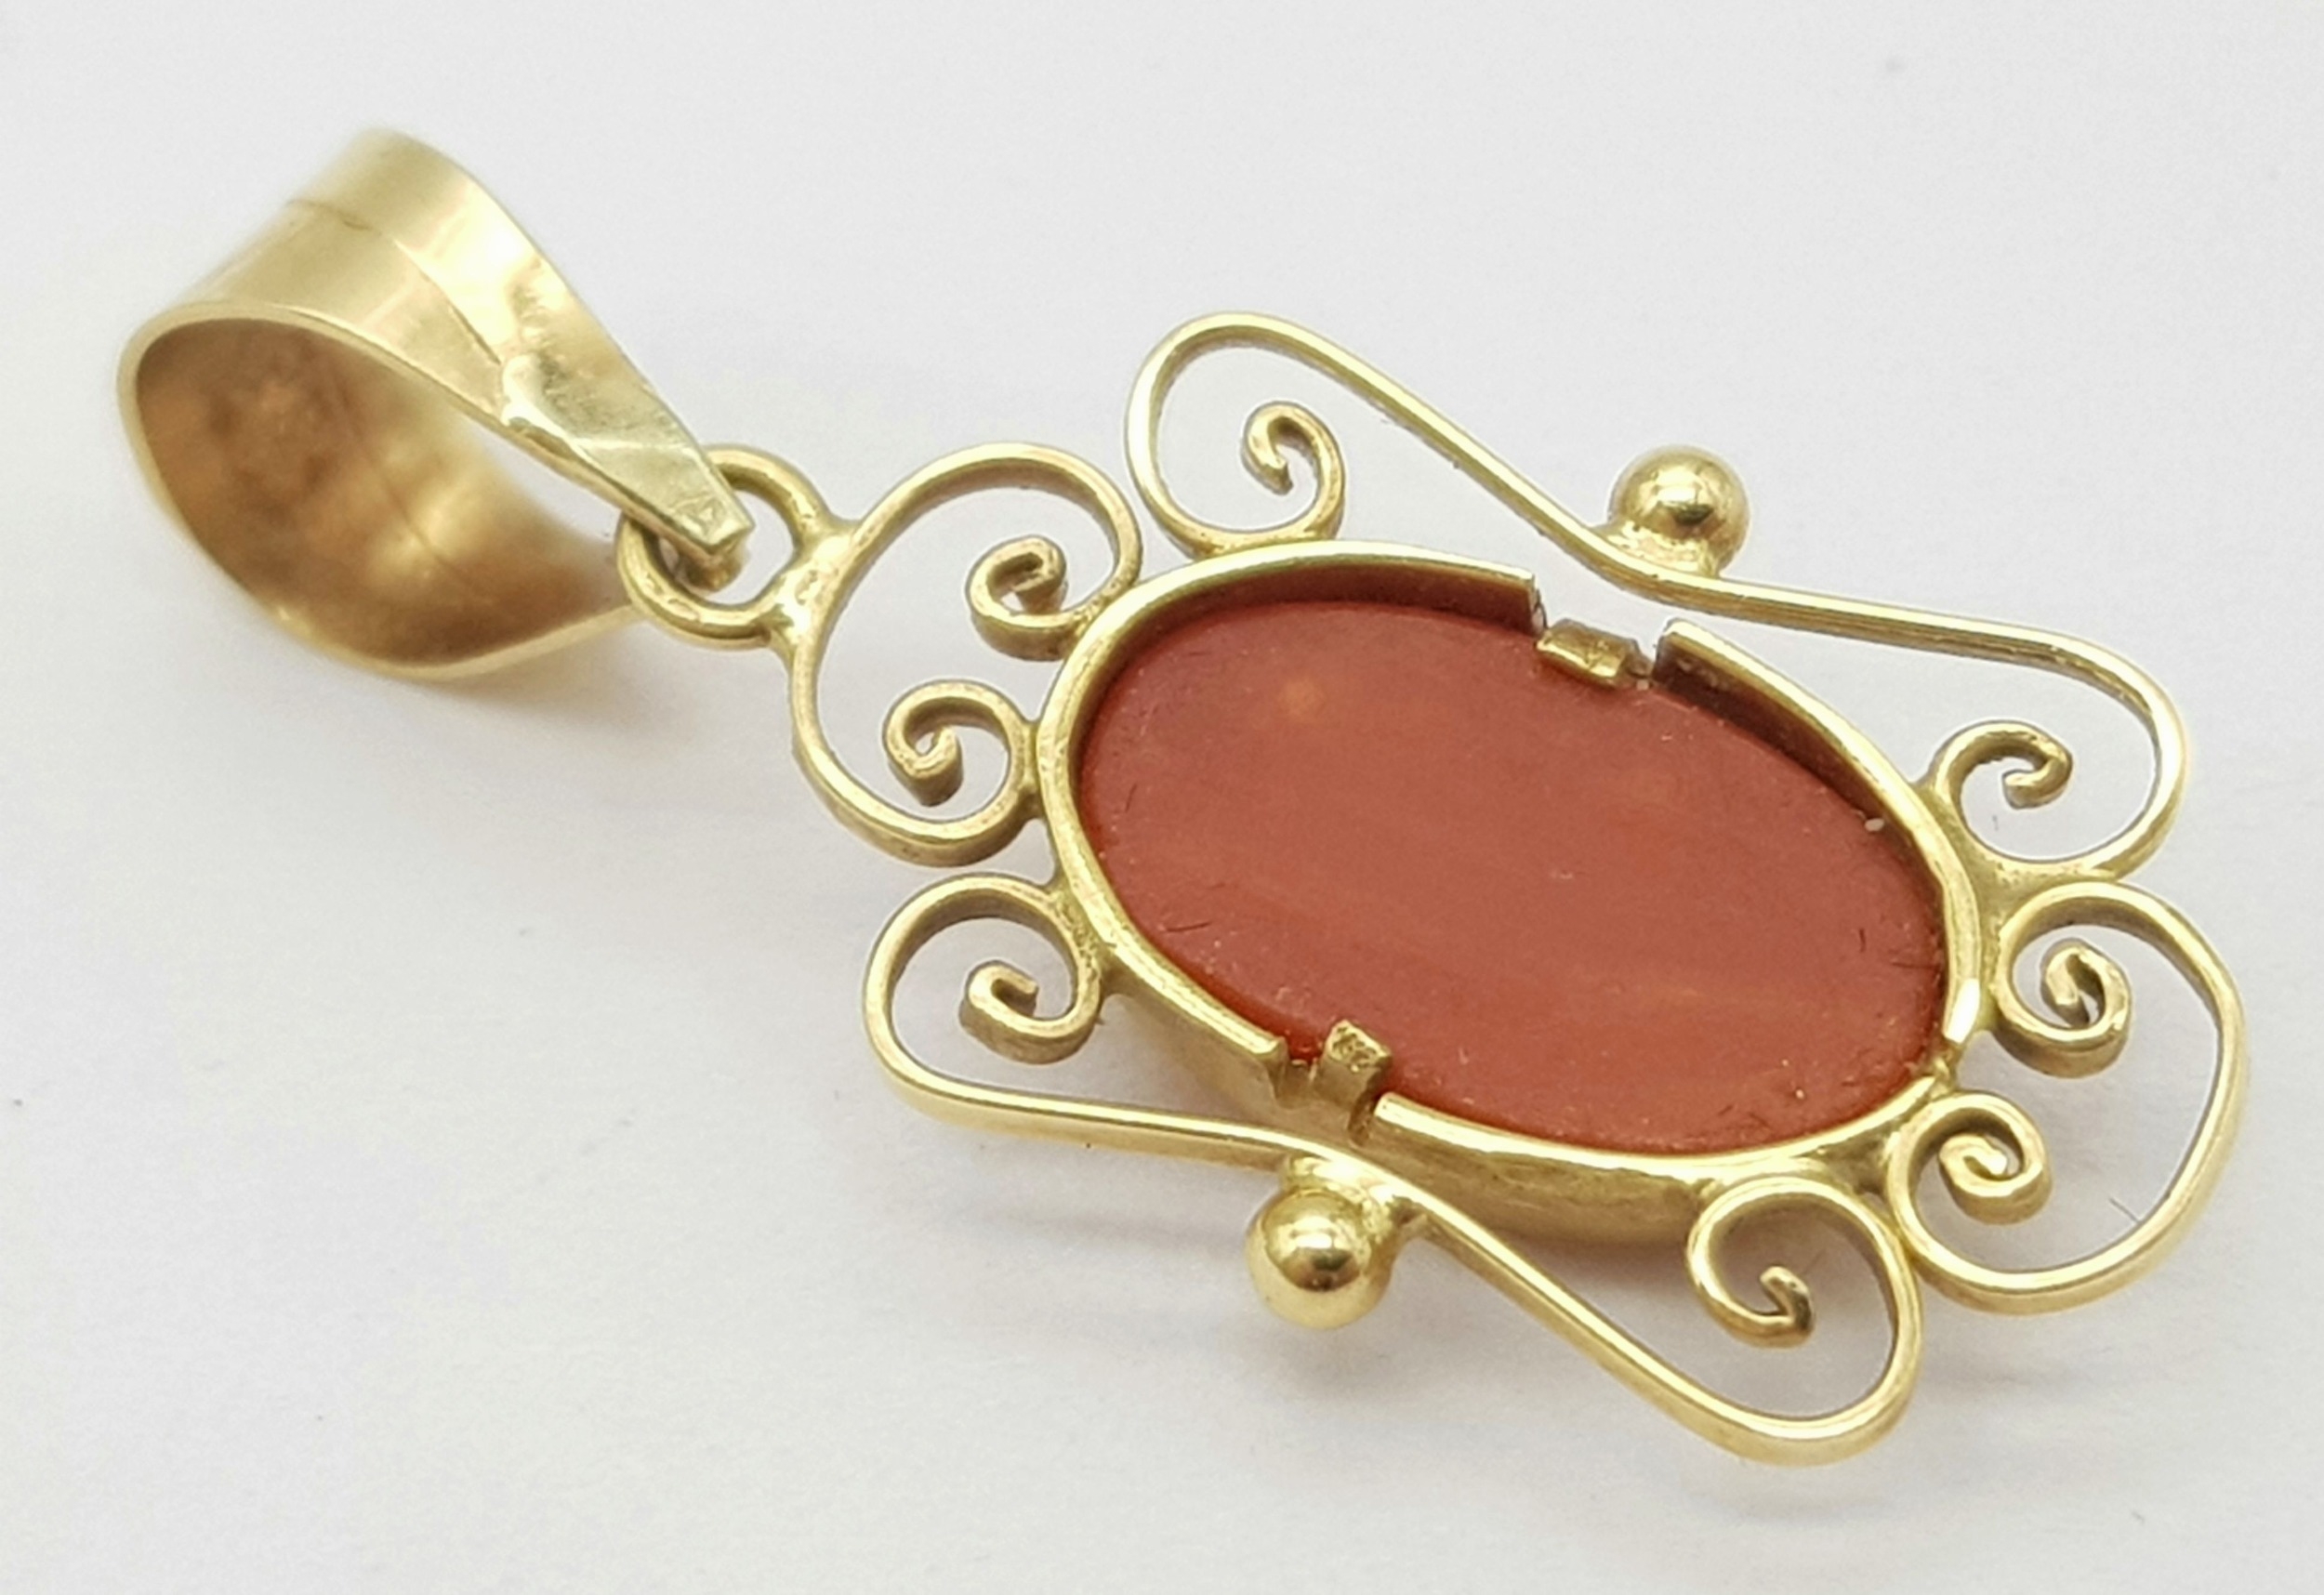 A 18ct Yellow Gold (tested as) Carnelian Fancy Pendant, 10mmx6mm carnelian, 1.4g weight, approx 26mm - Image 2 of 4